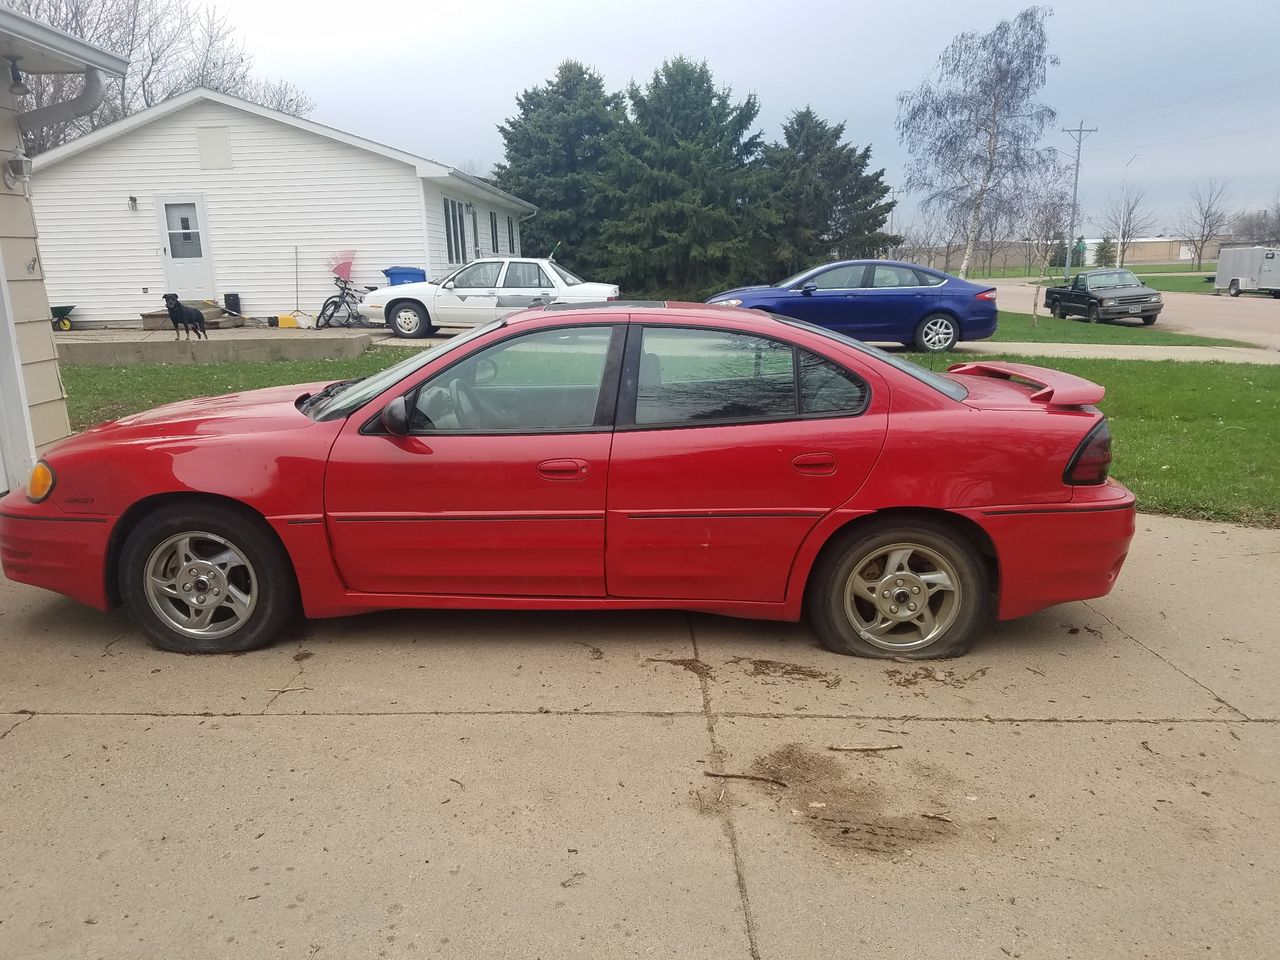 2004 Pontiac Grand Am | Beresford, SD, Victory Red (Red & Orange), Front Wheel